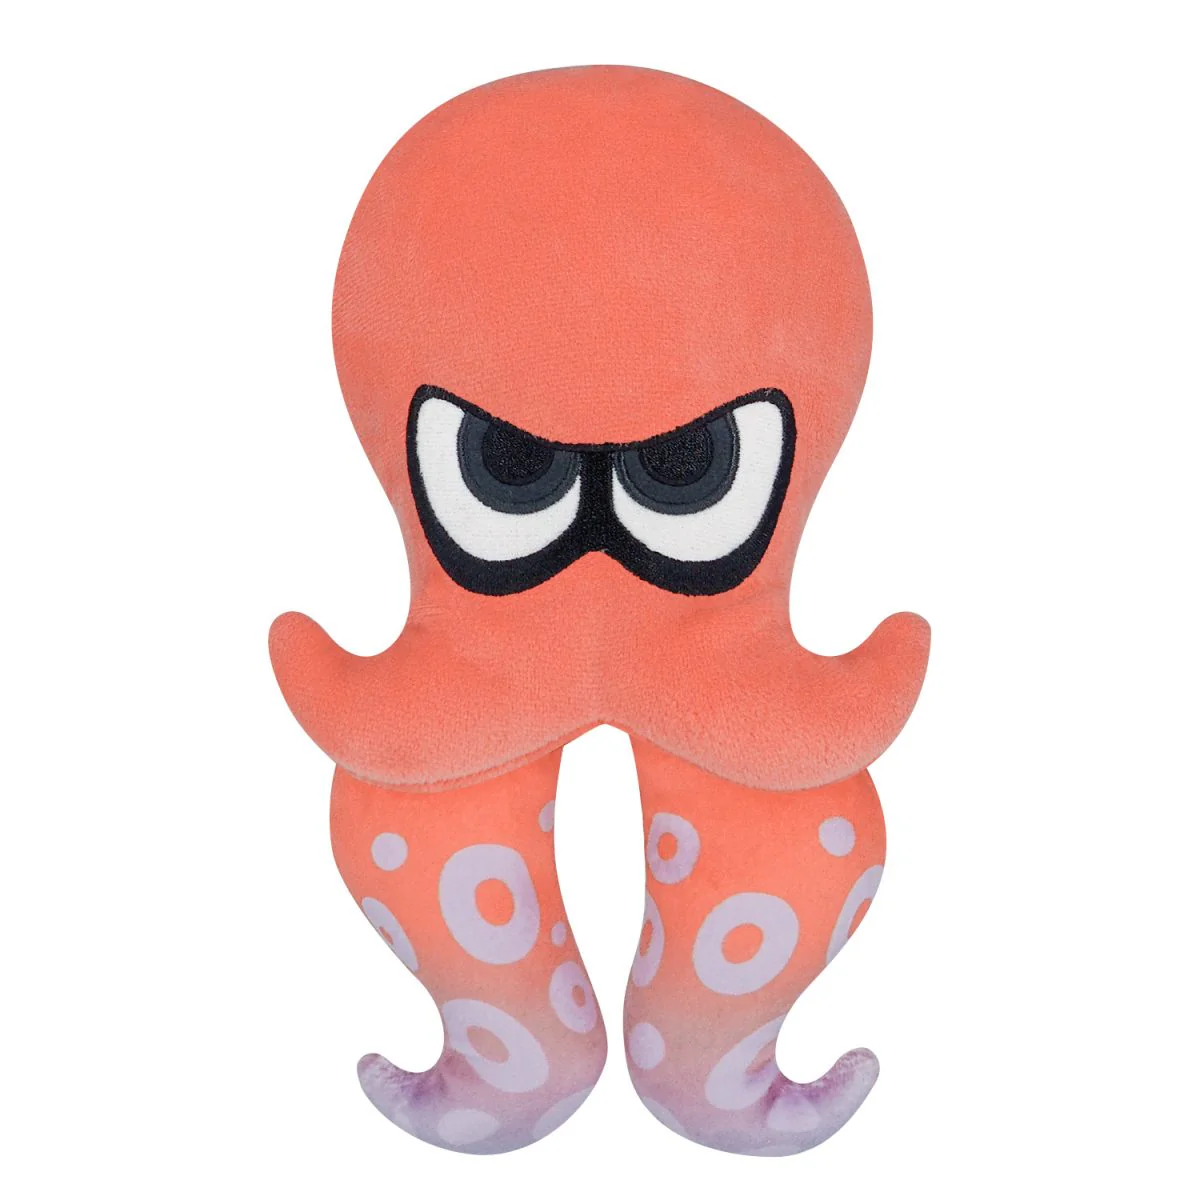 Little Buddy - 9" Red Octoling Octopus Plush (C02)